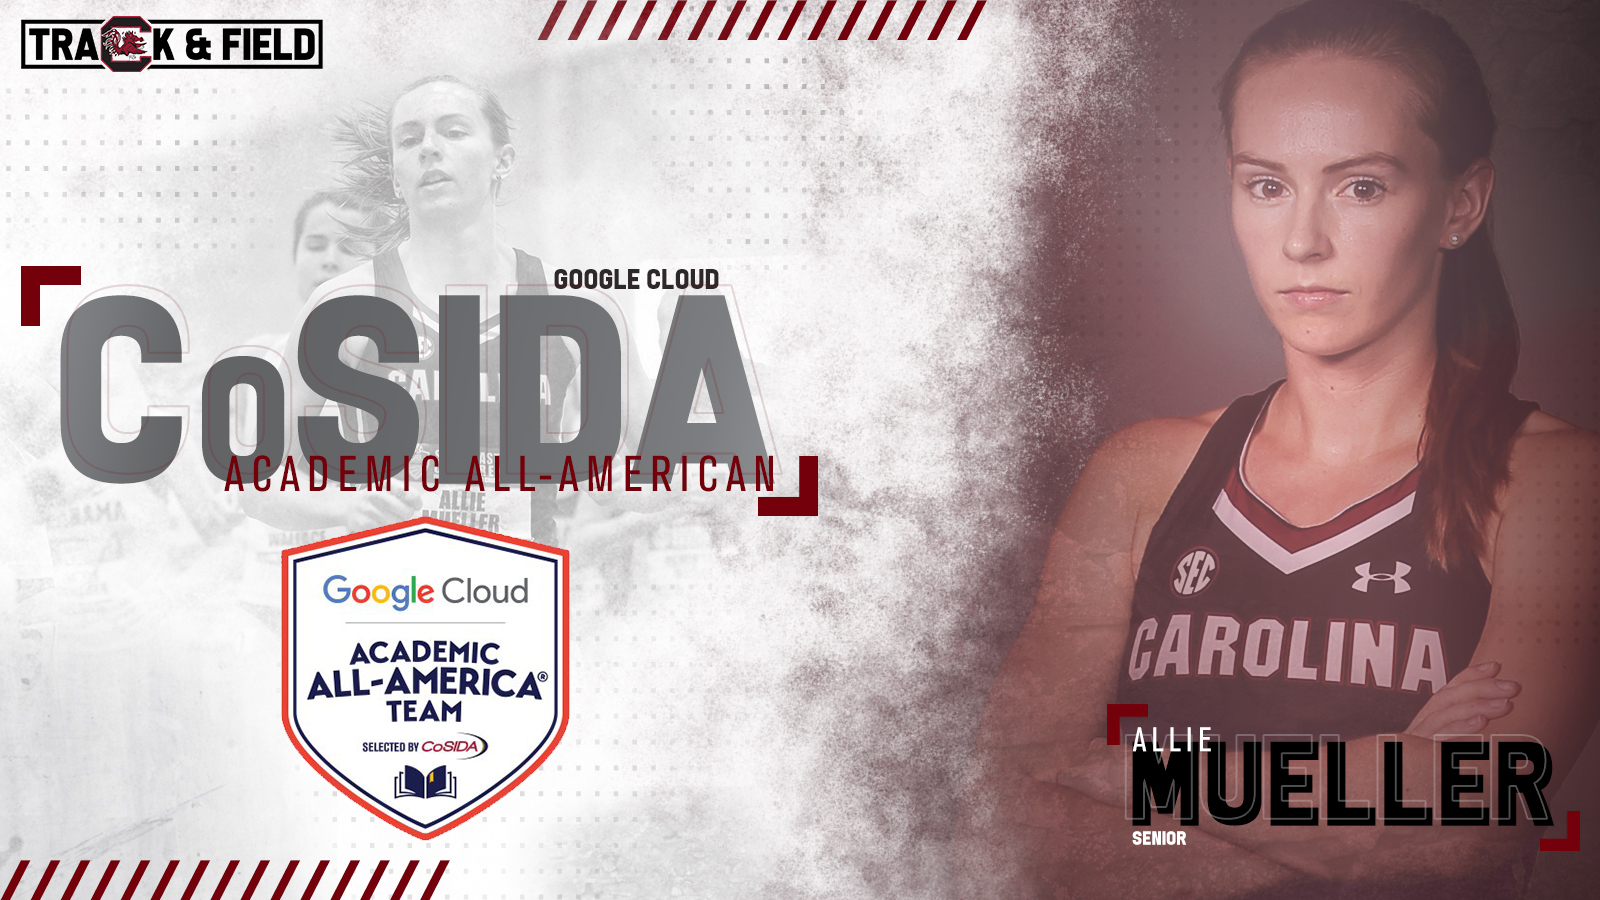 Mueller, Chance Selected as Google Cloud Academic All-Americans